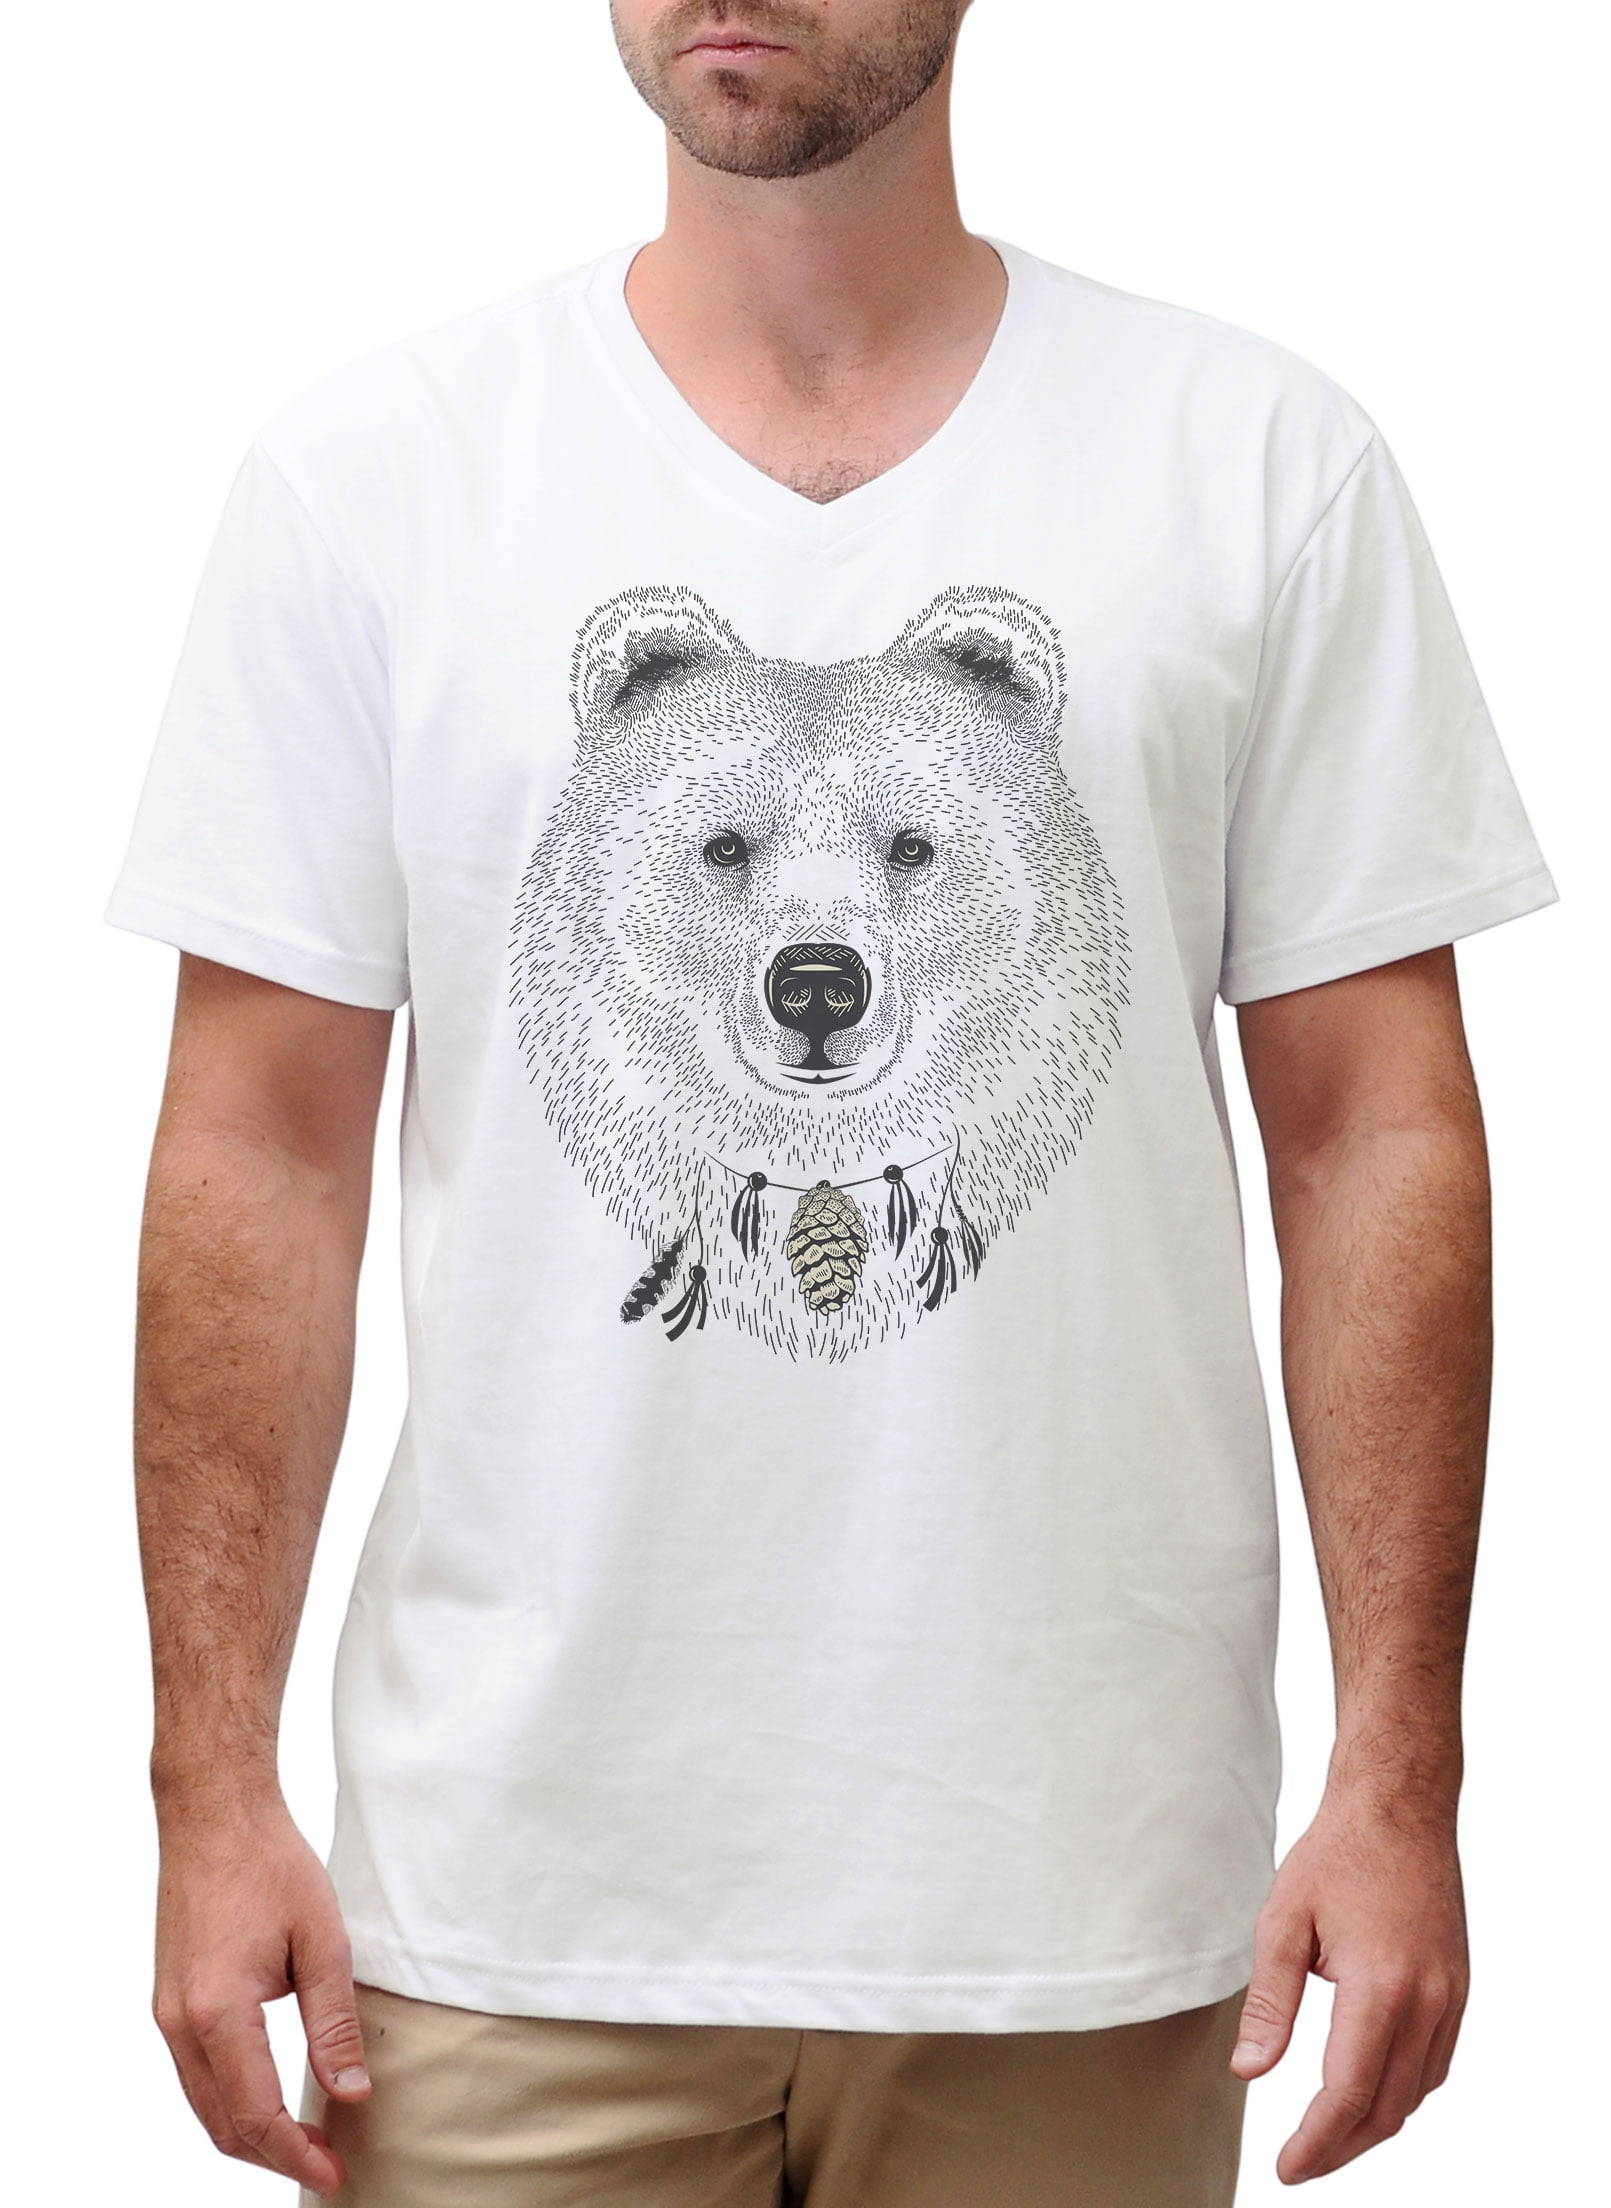 Grizzly Bear Face Logo Mens Tee Shirt Pick Size Color Small-6XL 